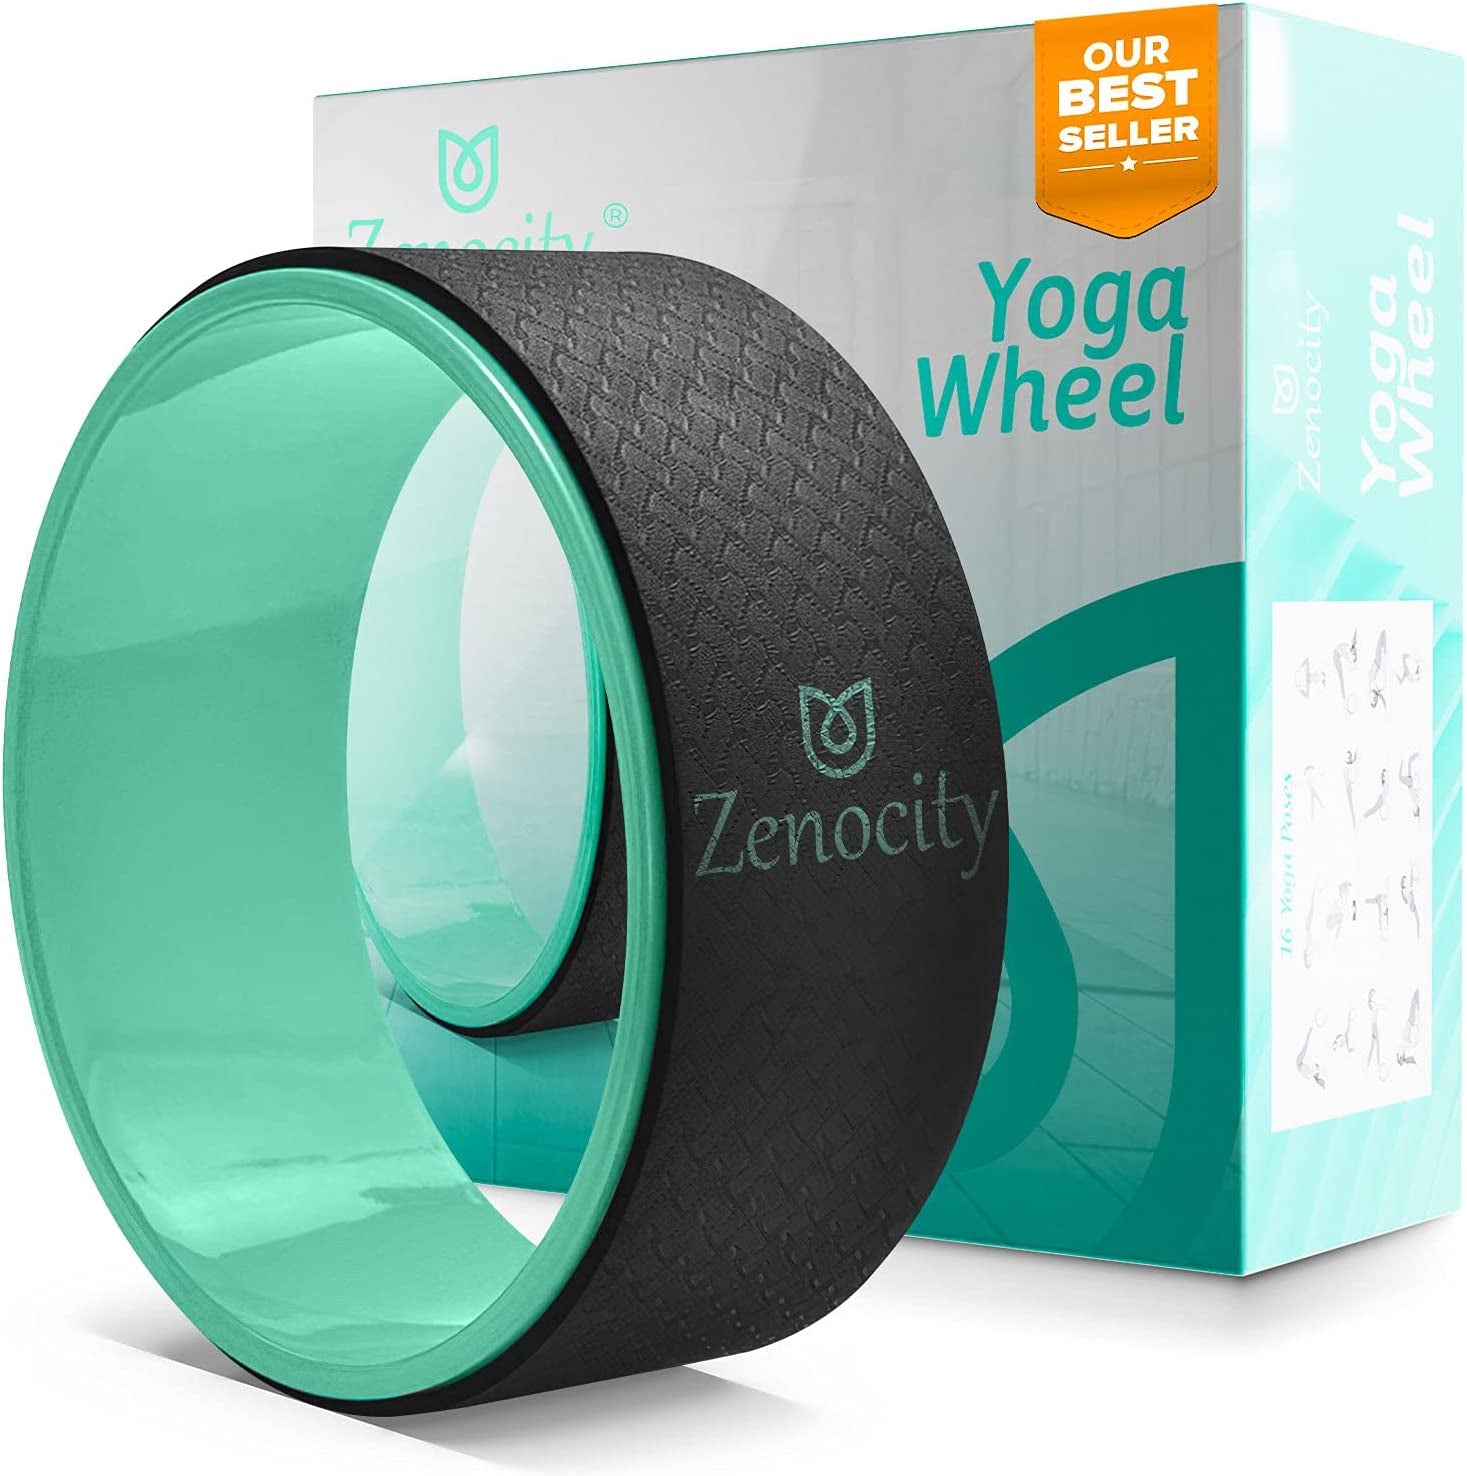 Yoga Back Roller - Yoga Wheel for Stretching and Back Pain Relief - Back Stretcher - Foam Roller - Balance Accessory for Stretching - Thick Padding for Comfort - Improve Flexibility